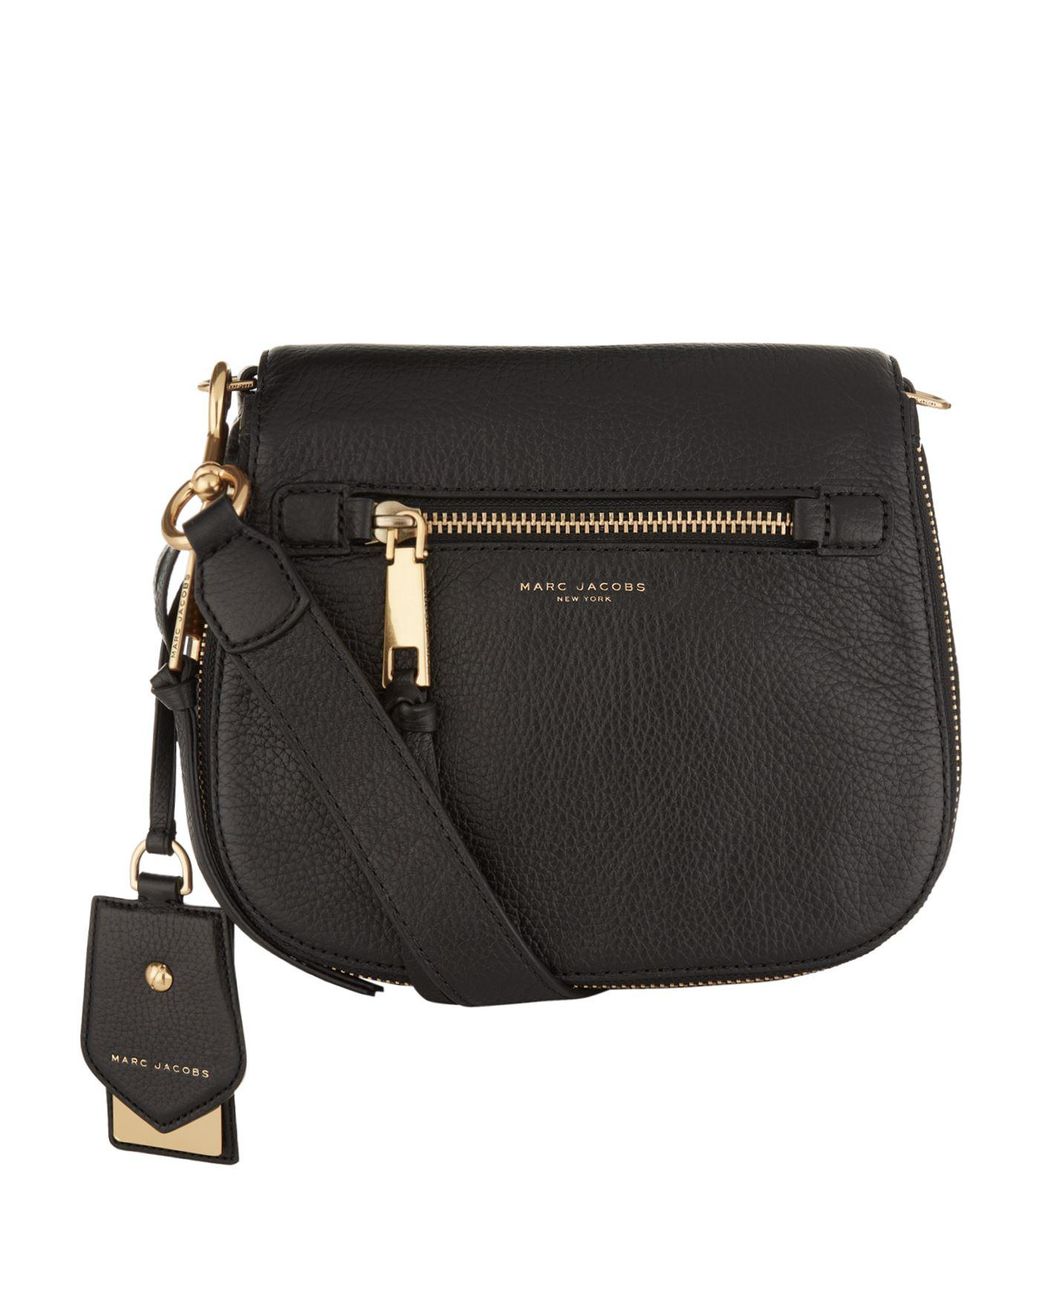 Marc Jacobs Large Recruit Saddle Bag in Black | Lyst